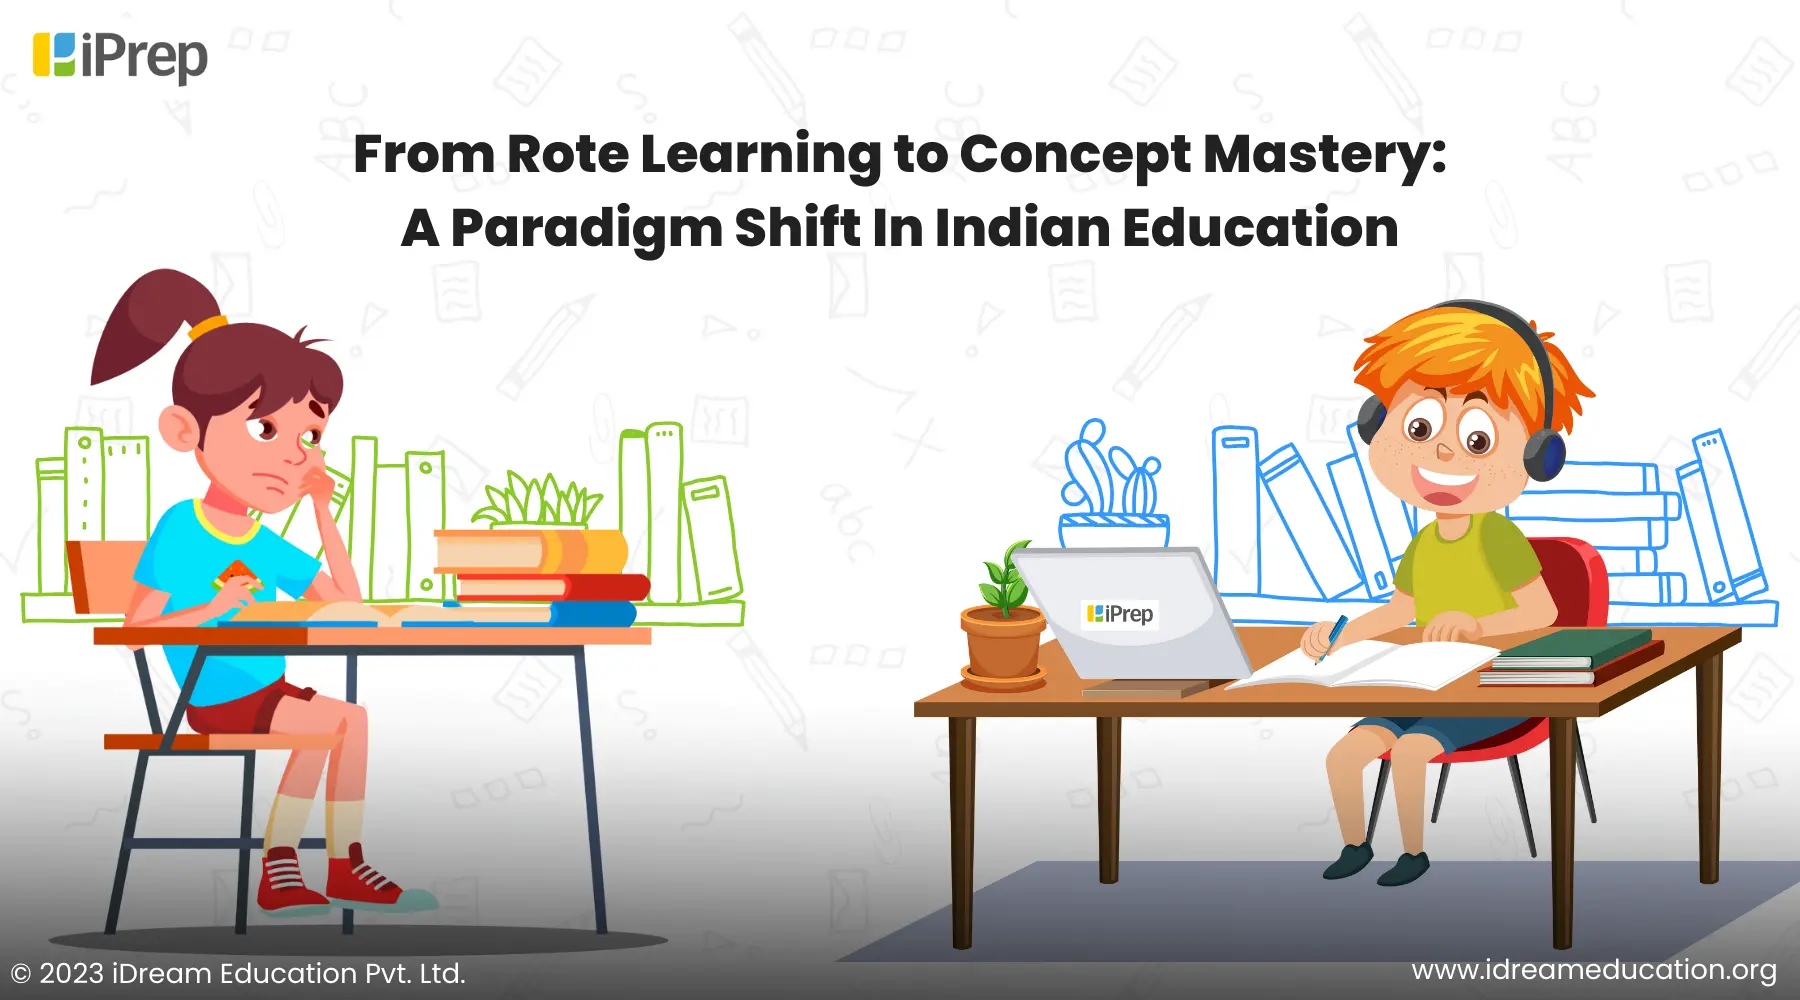 an image representing the shift from rote learning to concept mastery for school students in India